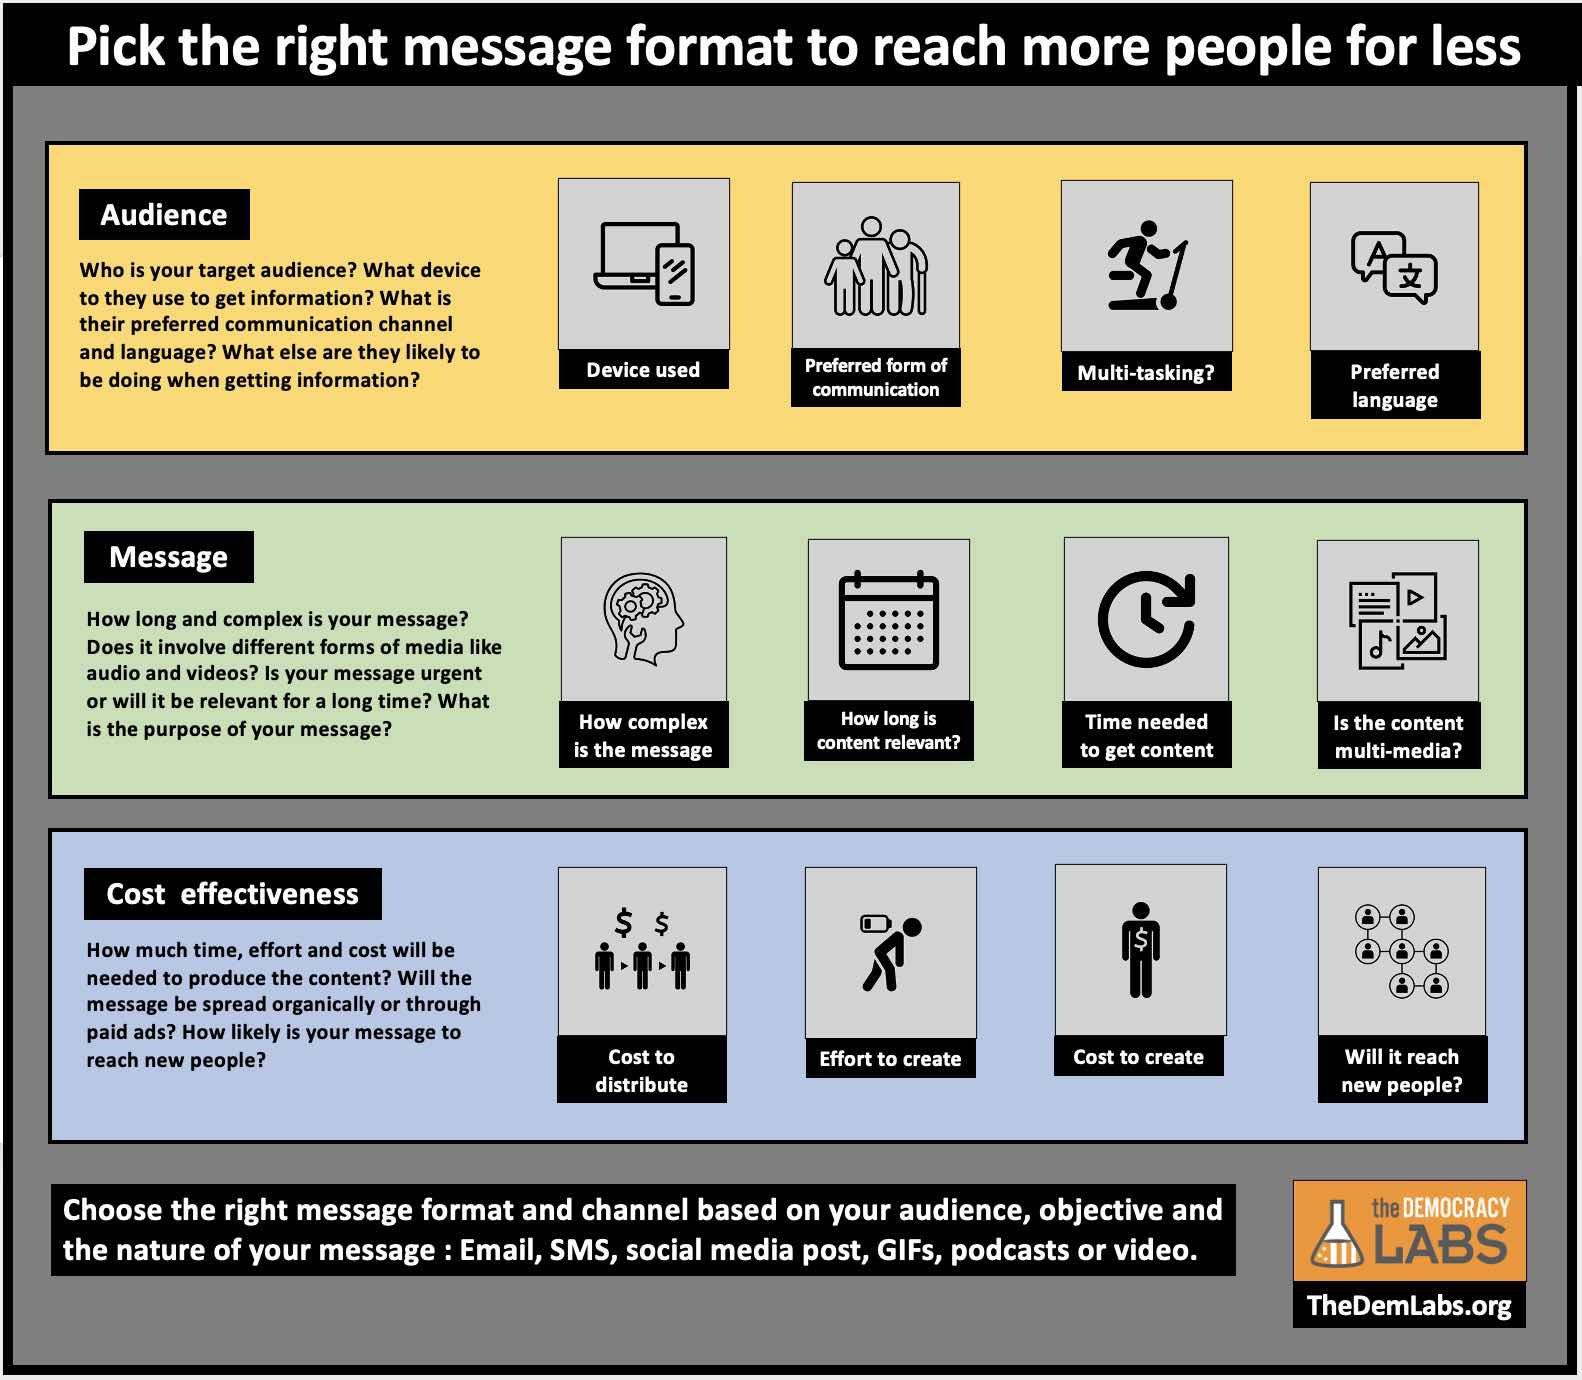 How to choose the right message format and communication channel to reach more people.